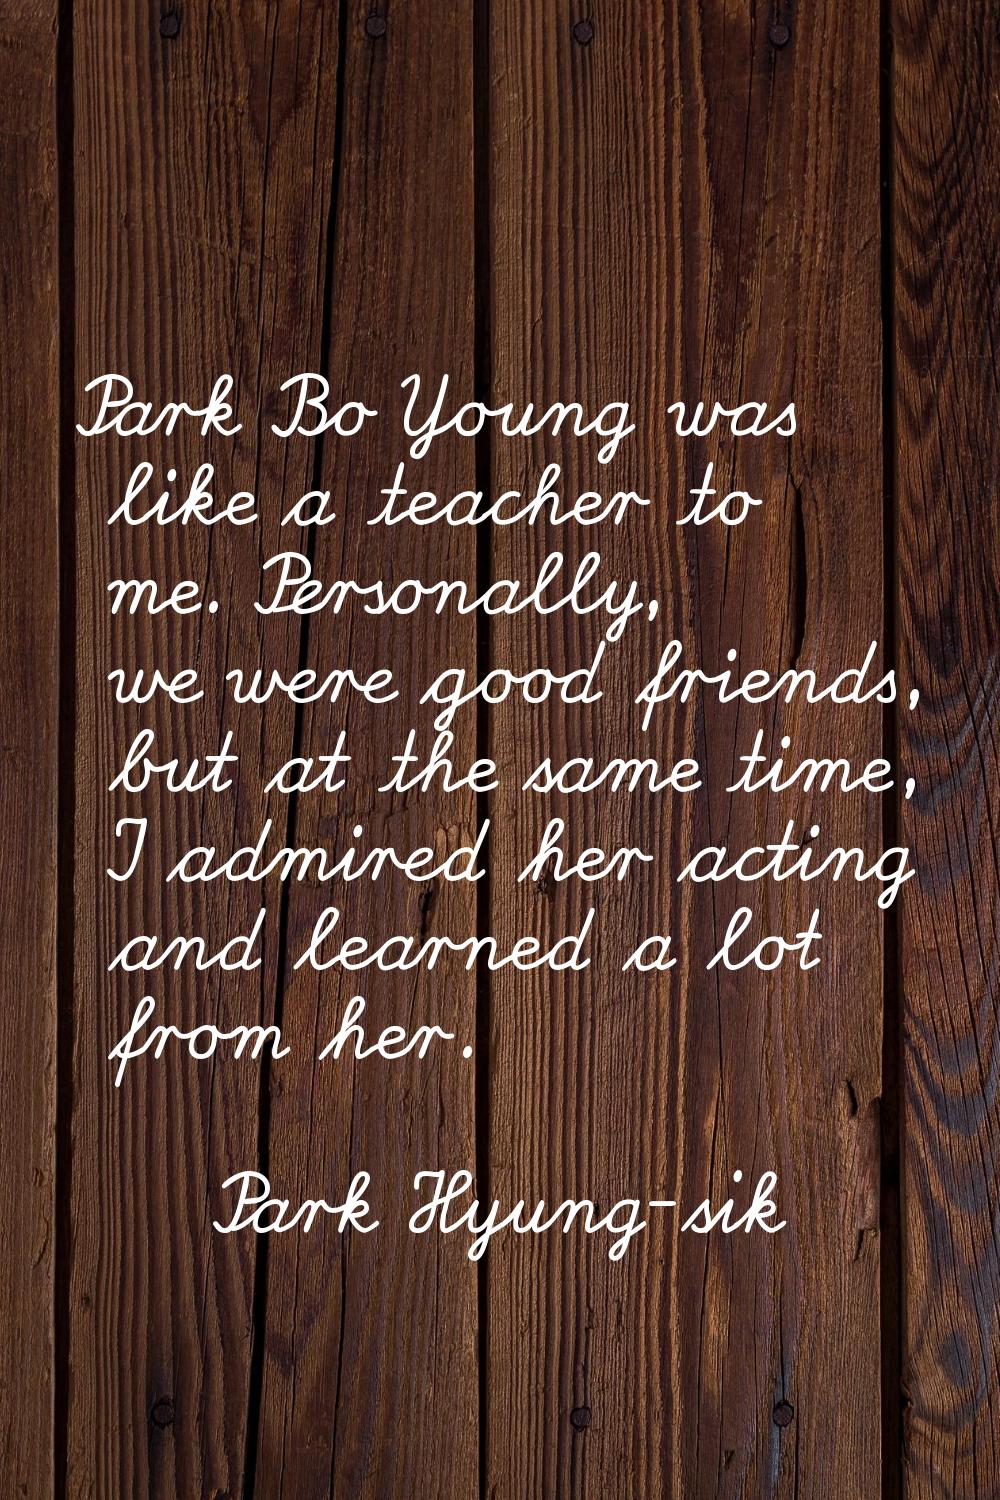 Park Bo Young was like a teacher to me. Personally, we were good friends, but at the same time, I a